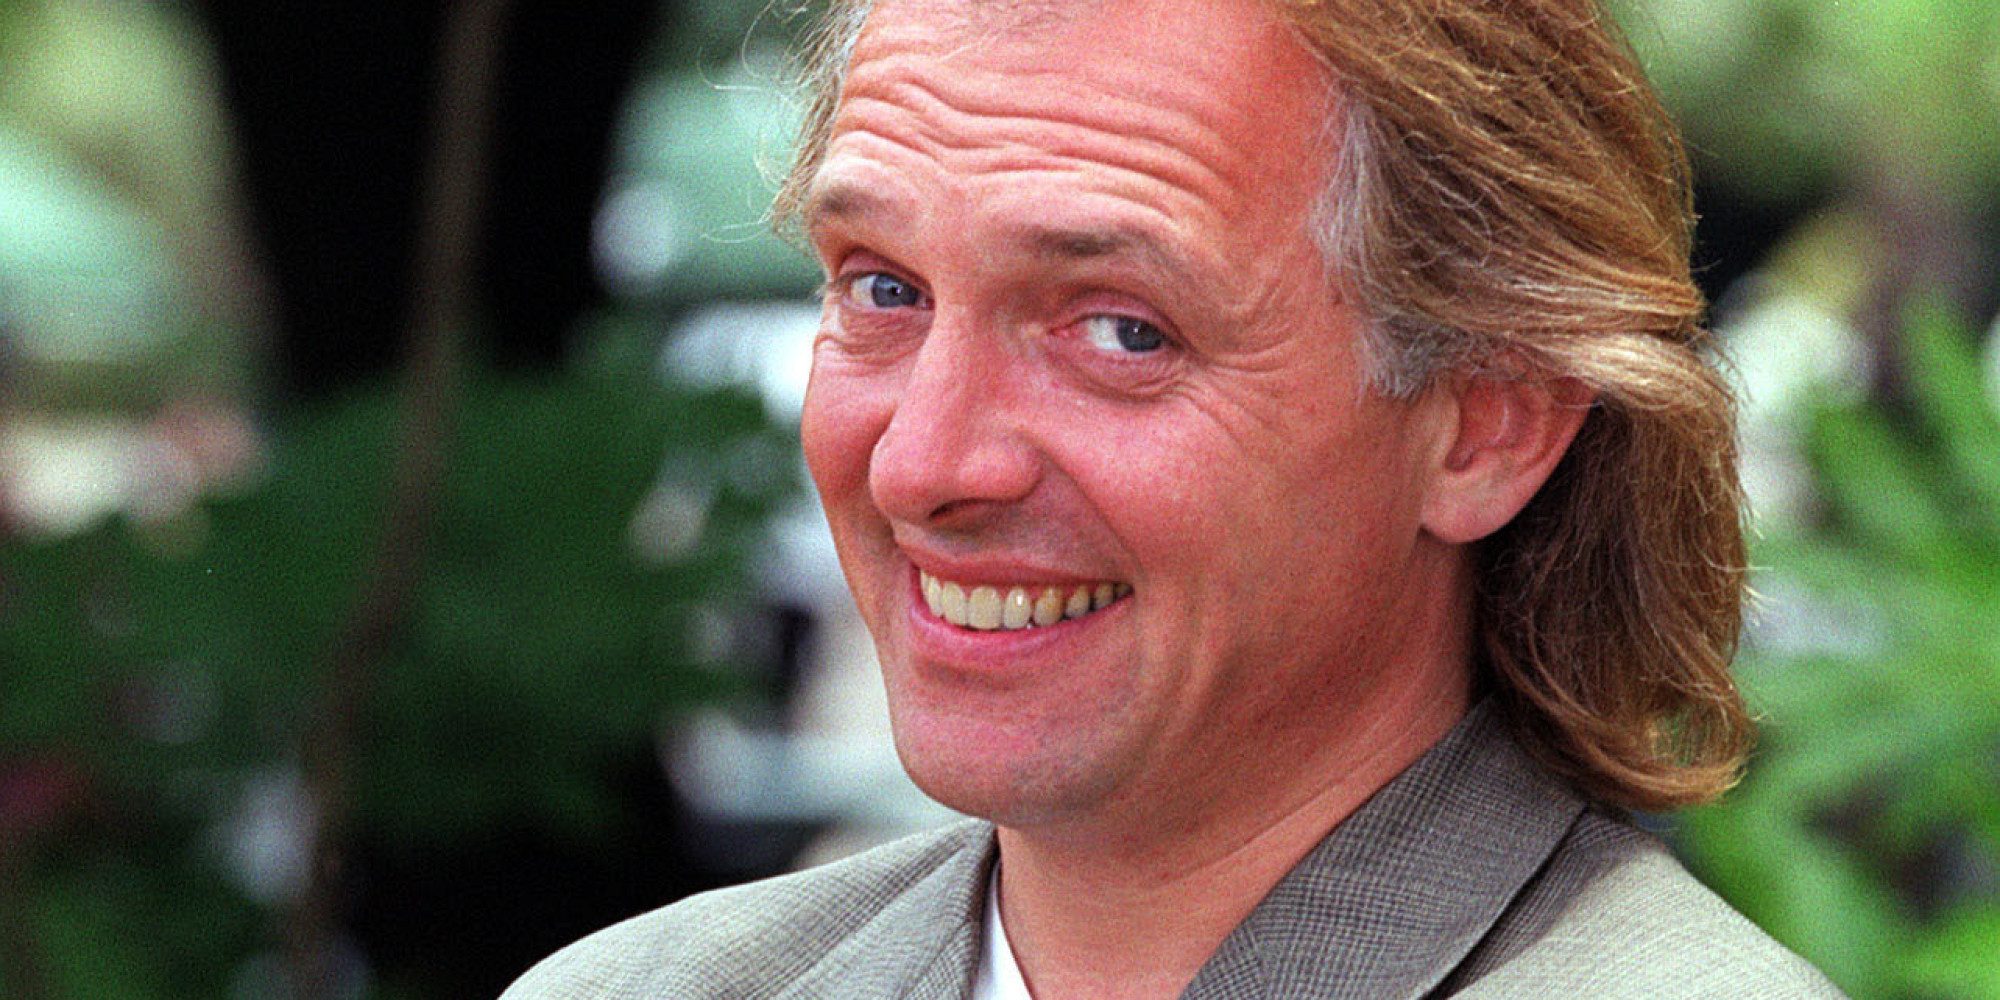 Rik Mayall #39 s Final TV Appearance To Air Next Month Late Comic Actor